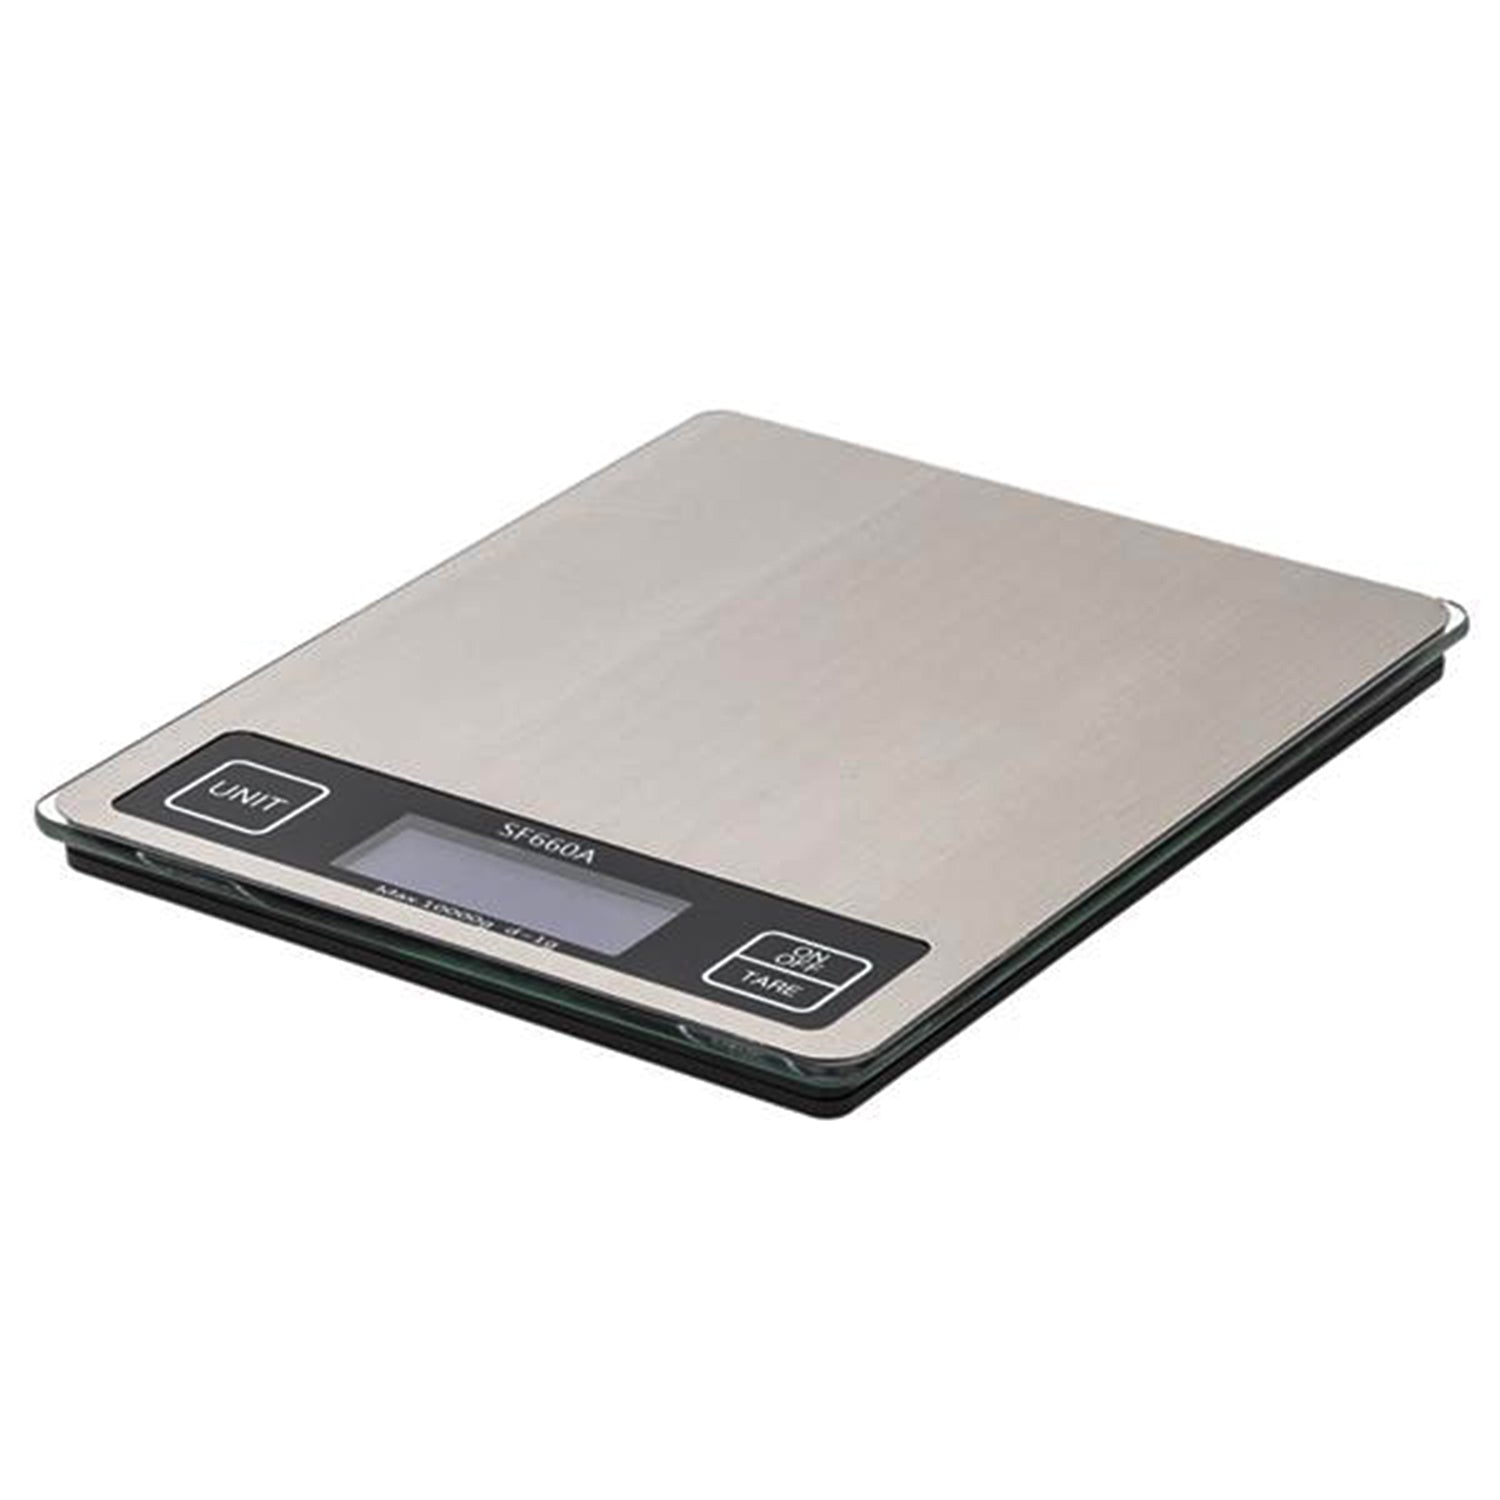 Food Scale, 22lb Digital Kitchen Scale Weight Grams and oz for Cooking  Baking, 1g/0.1oz Precise Graduation, Stainless Steel and Tempered Glass 